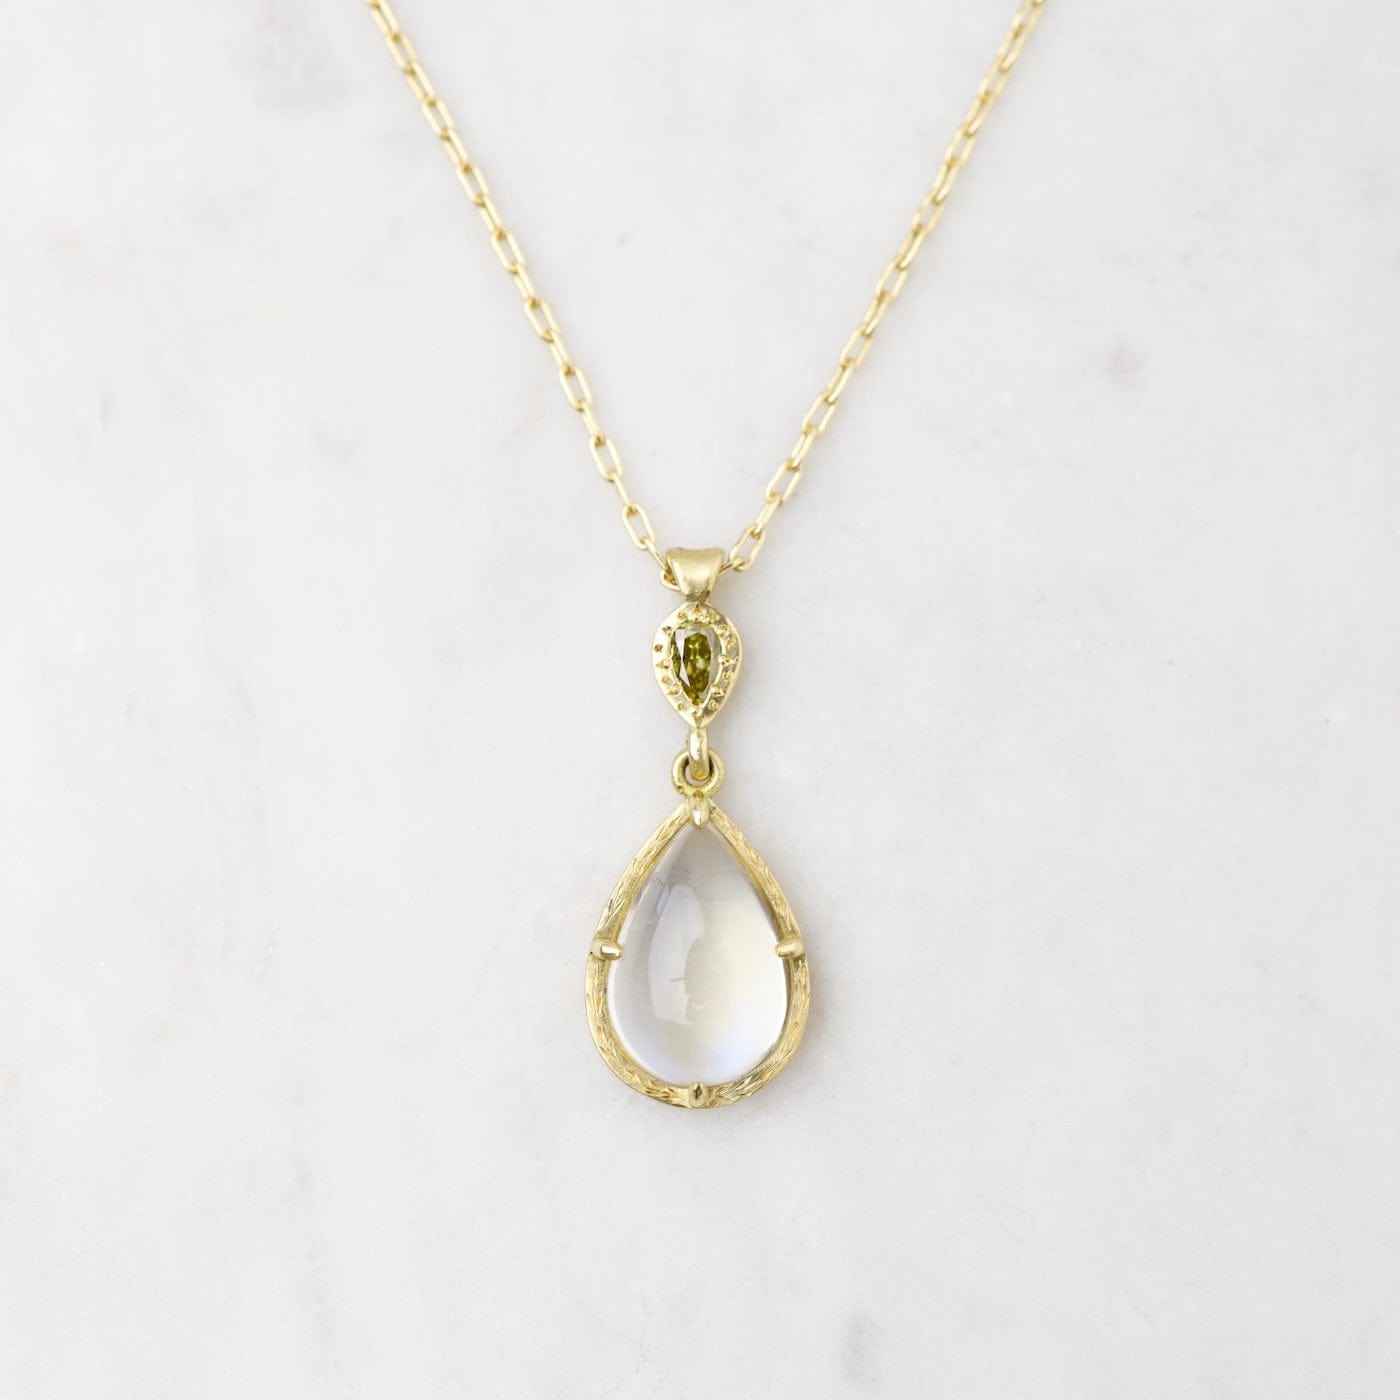 NKL-18K Prong Pear Moonstone Necklace